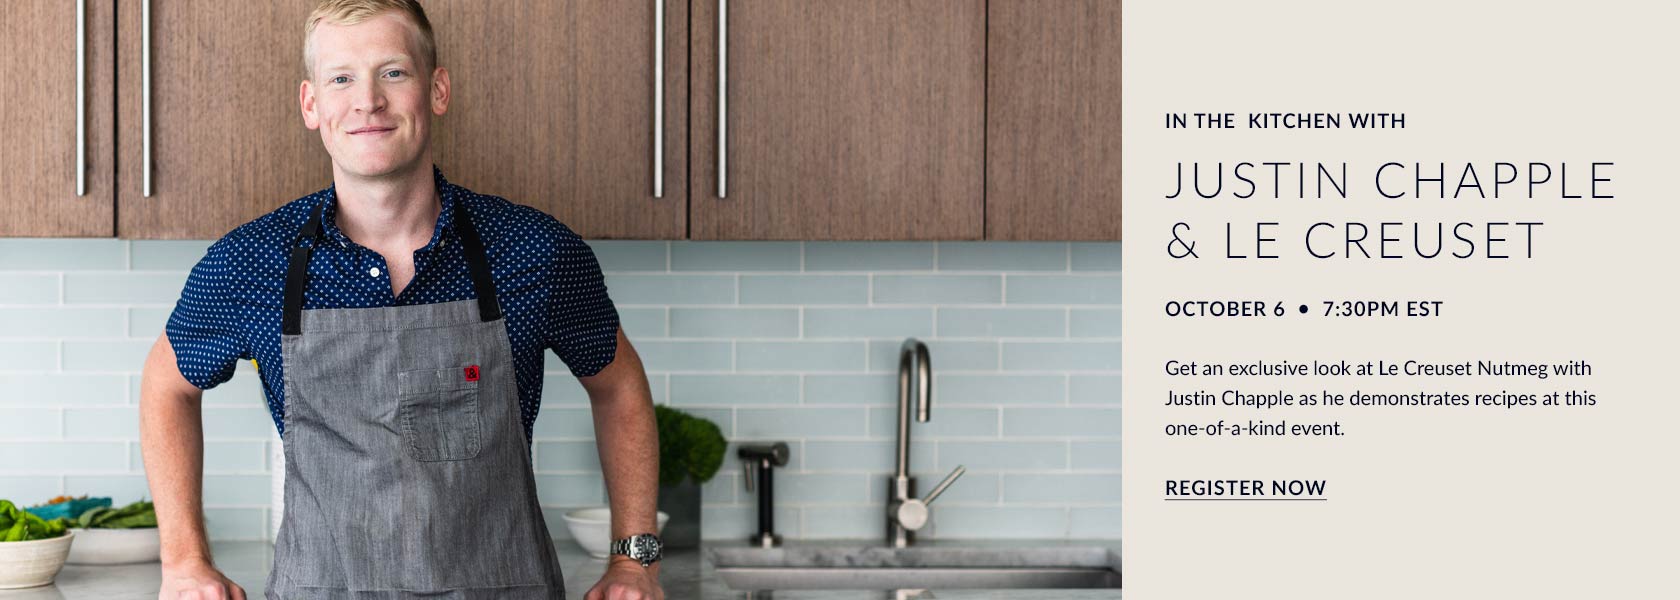 In the kitchen with Justin Chapple & Le Creuset, October 6, 7:30 pm EST.